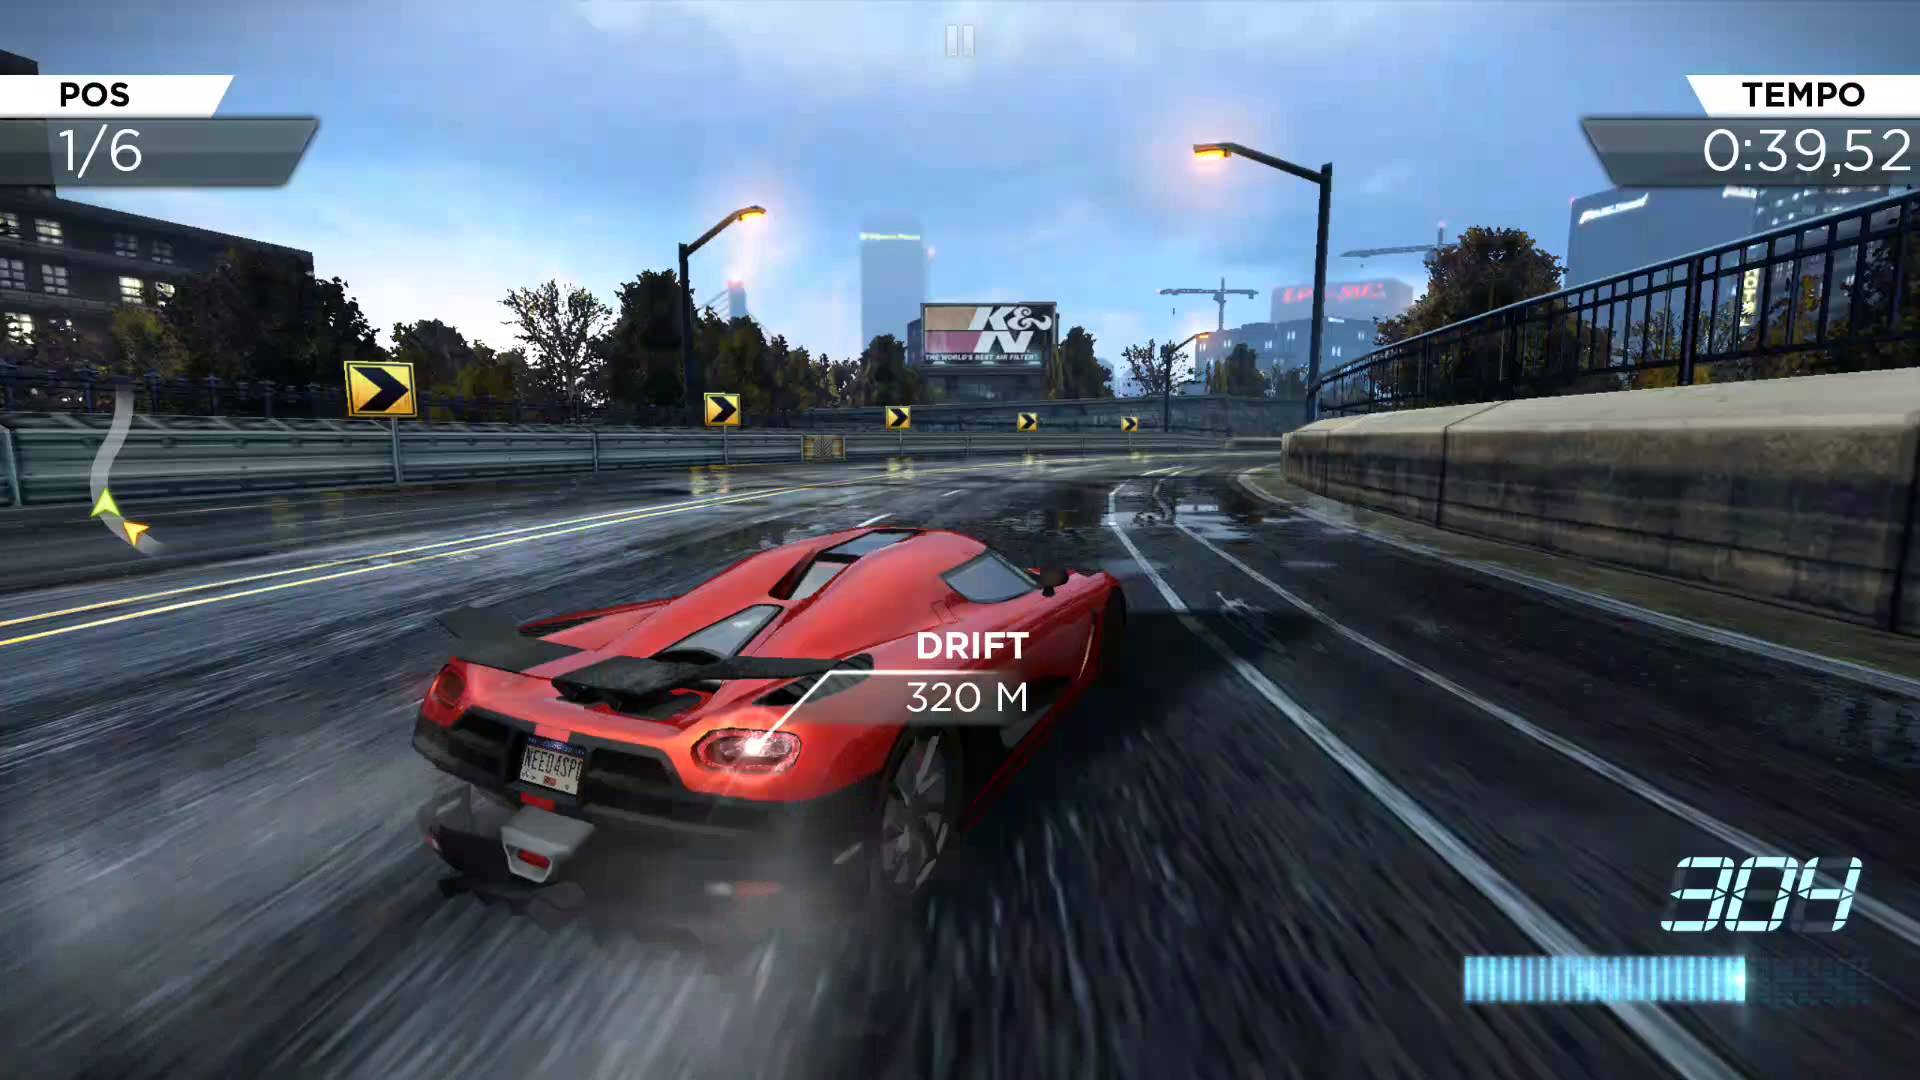 Nfs 2 mobile. NFS most wanted 2012 на андроид. Нфс 2012 андроид. Need for Speed most wanted геймплей. Ned Ford Spirs most wanted 2 андроид.